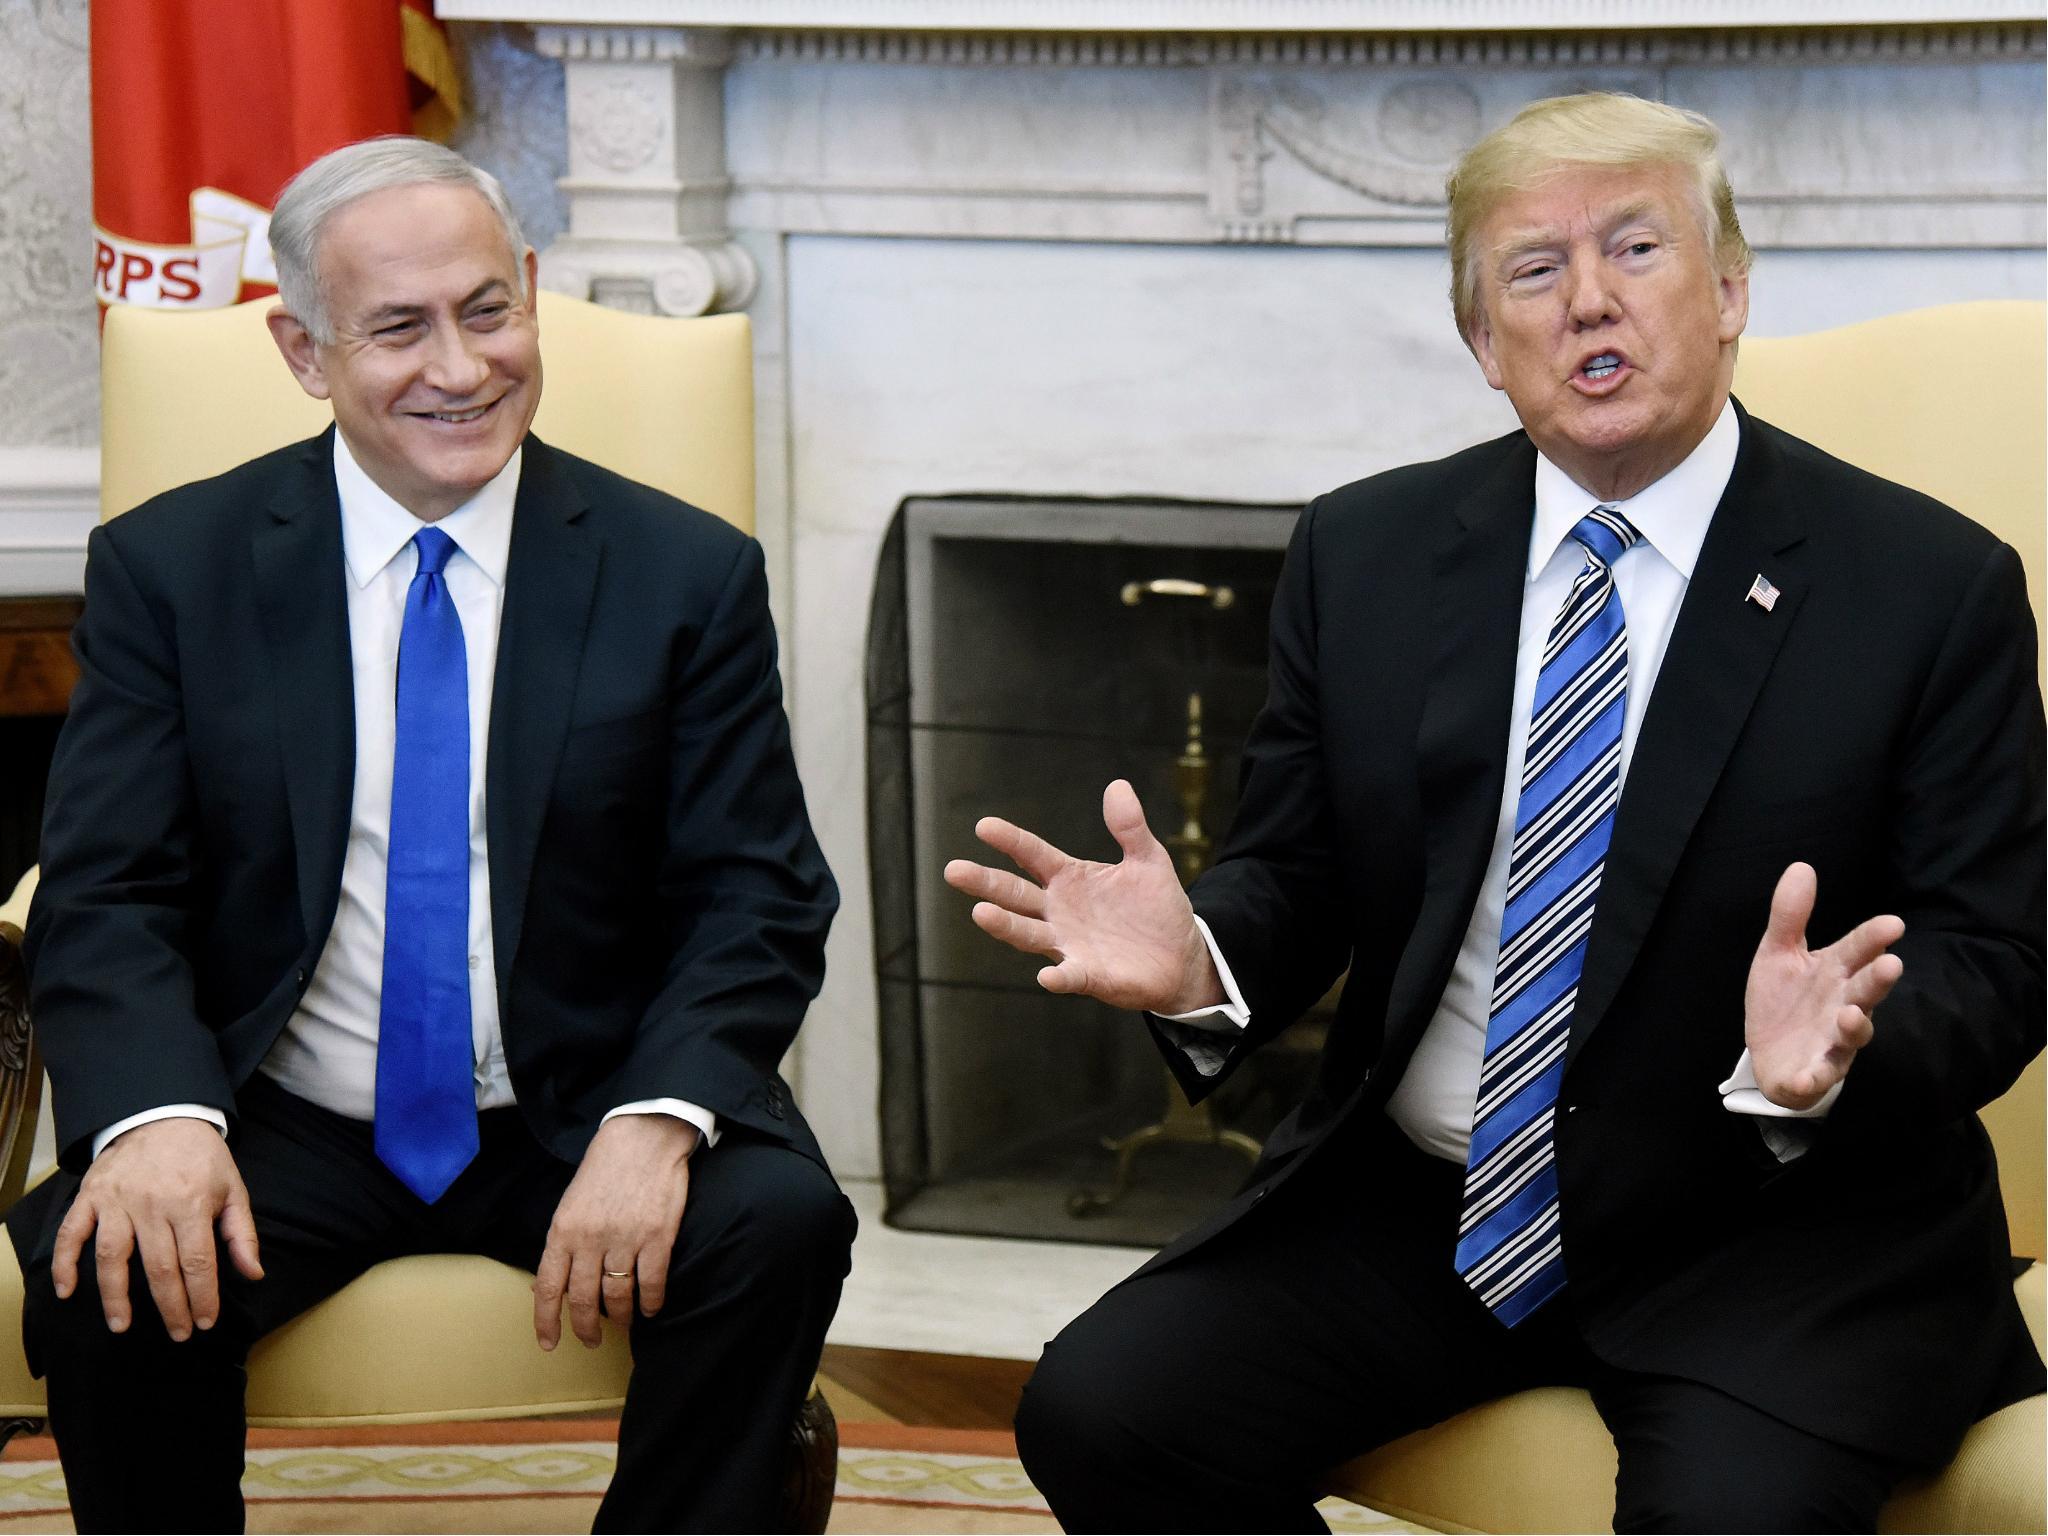 US President Donald Trump and Israel Prime Minister Benjamin Netanyahu meet in the Oval Office of the White House 5 March 2018.